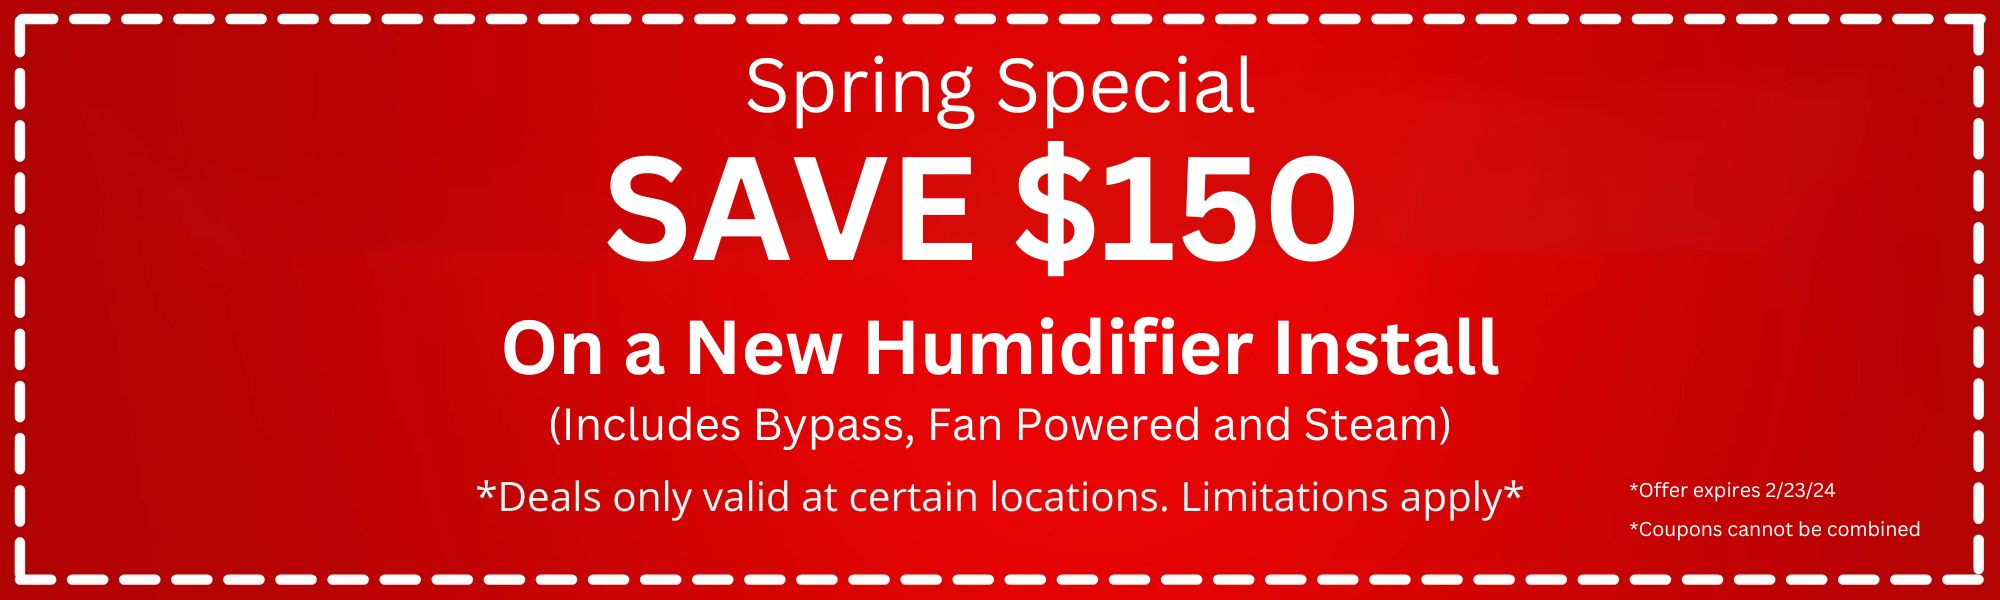 Spring Special: Save $150 on a new humidifier install. Includes Bypass, Fan Powered, and Steam. Deals only valid at certain locations. Limitations apply. Offer expires 2/23/24. Coupons cannot be combined.